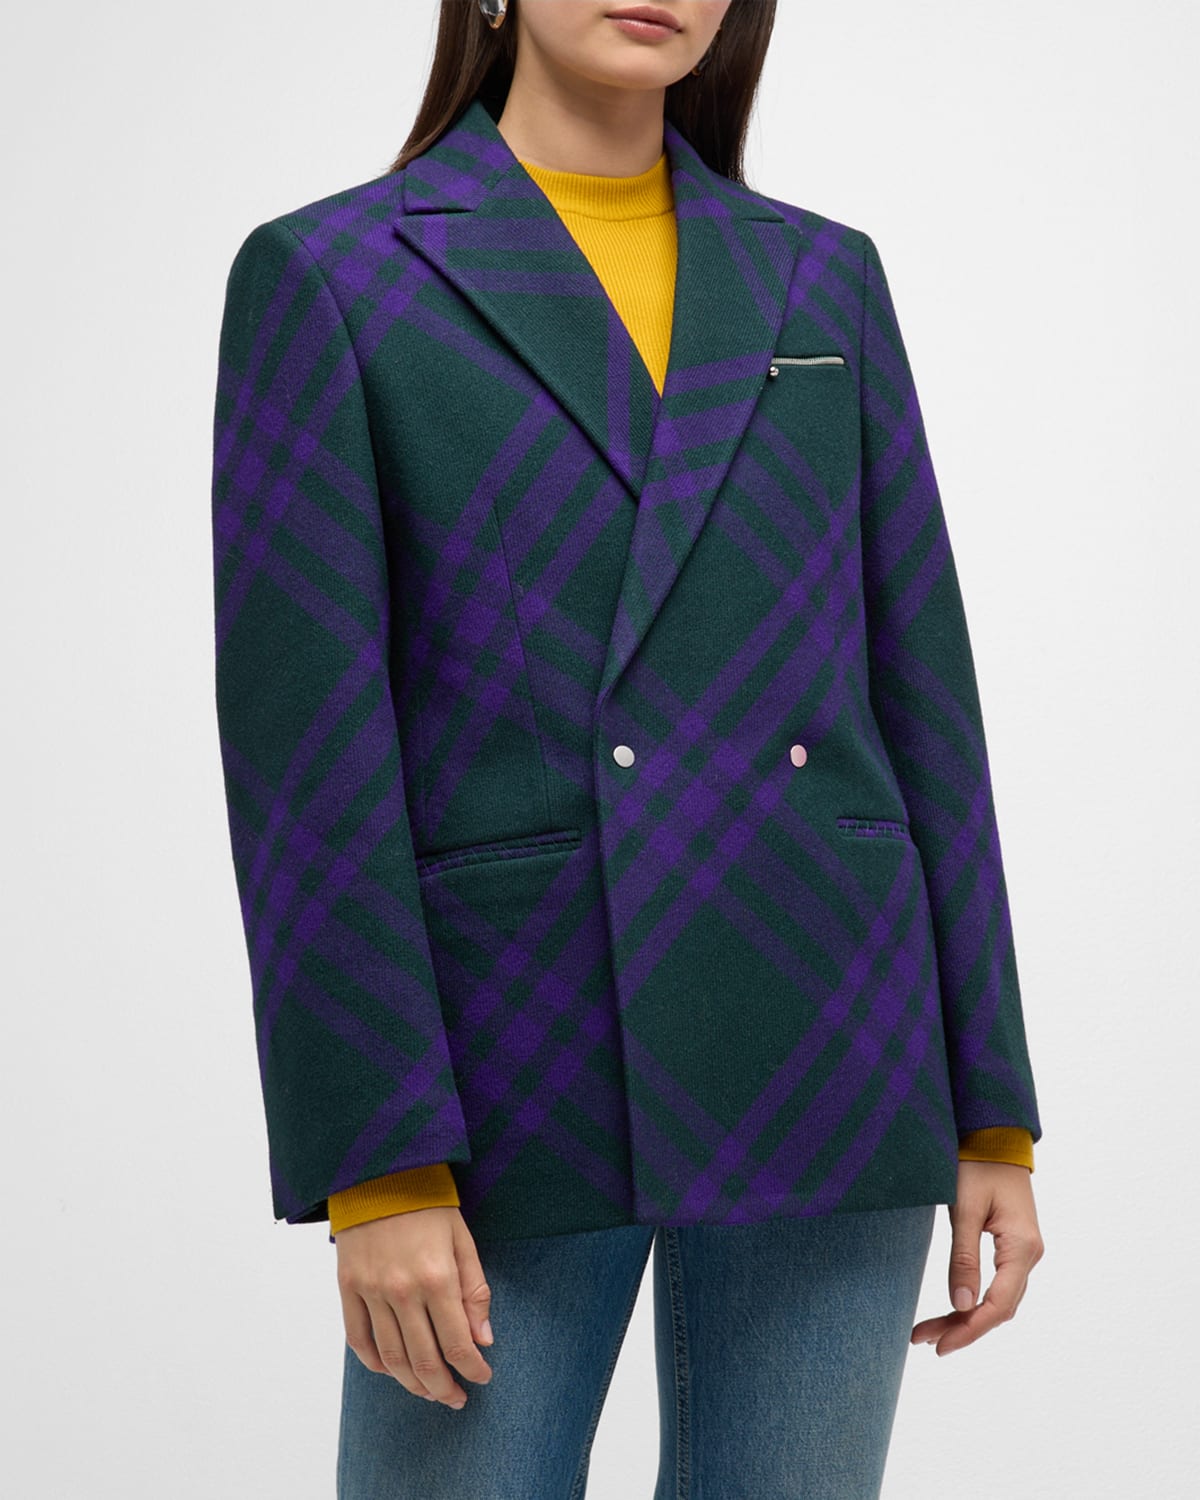 BURBERRY CHECK ZIP-POCKET DOUBLE-BREASTED WOOL TAILORED JACKET